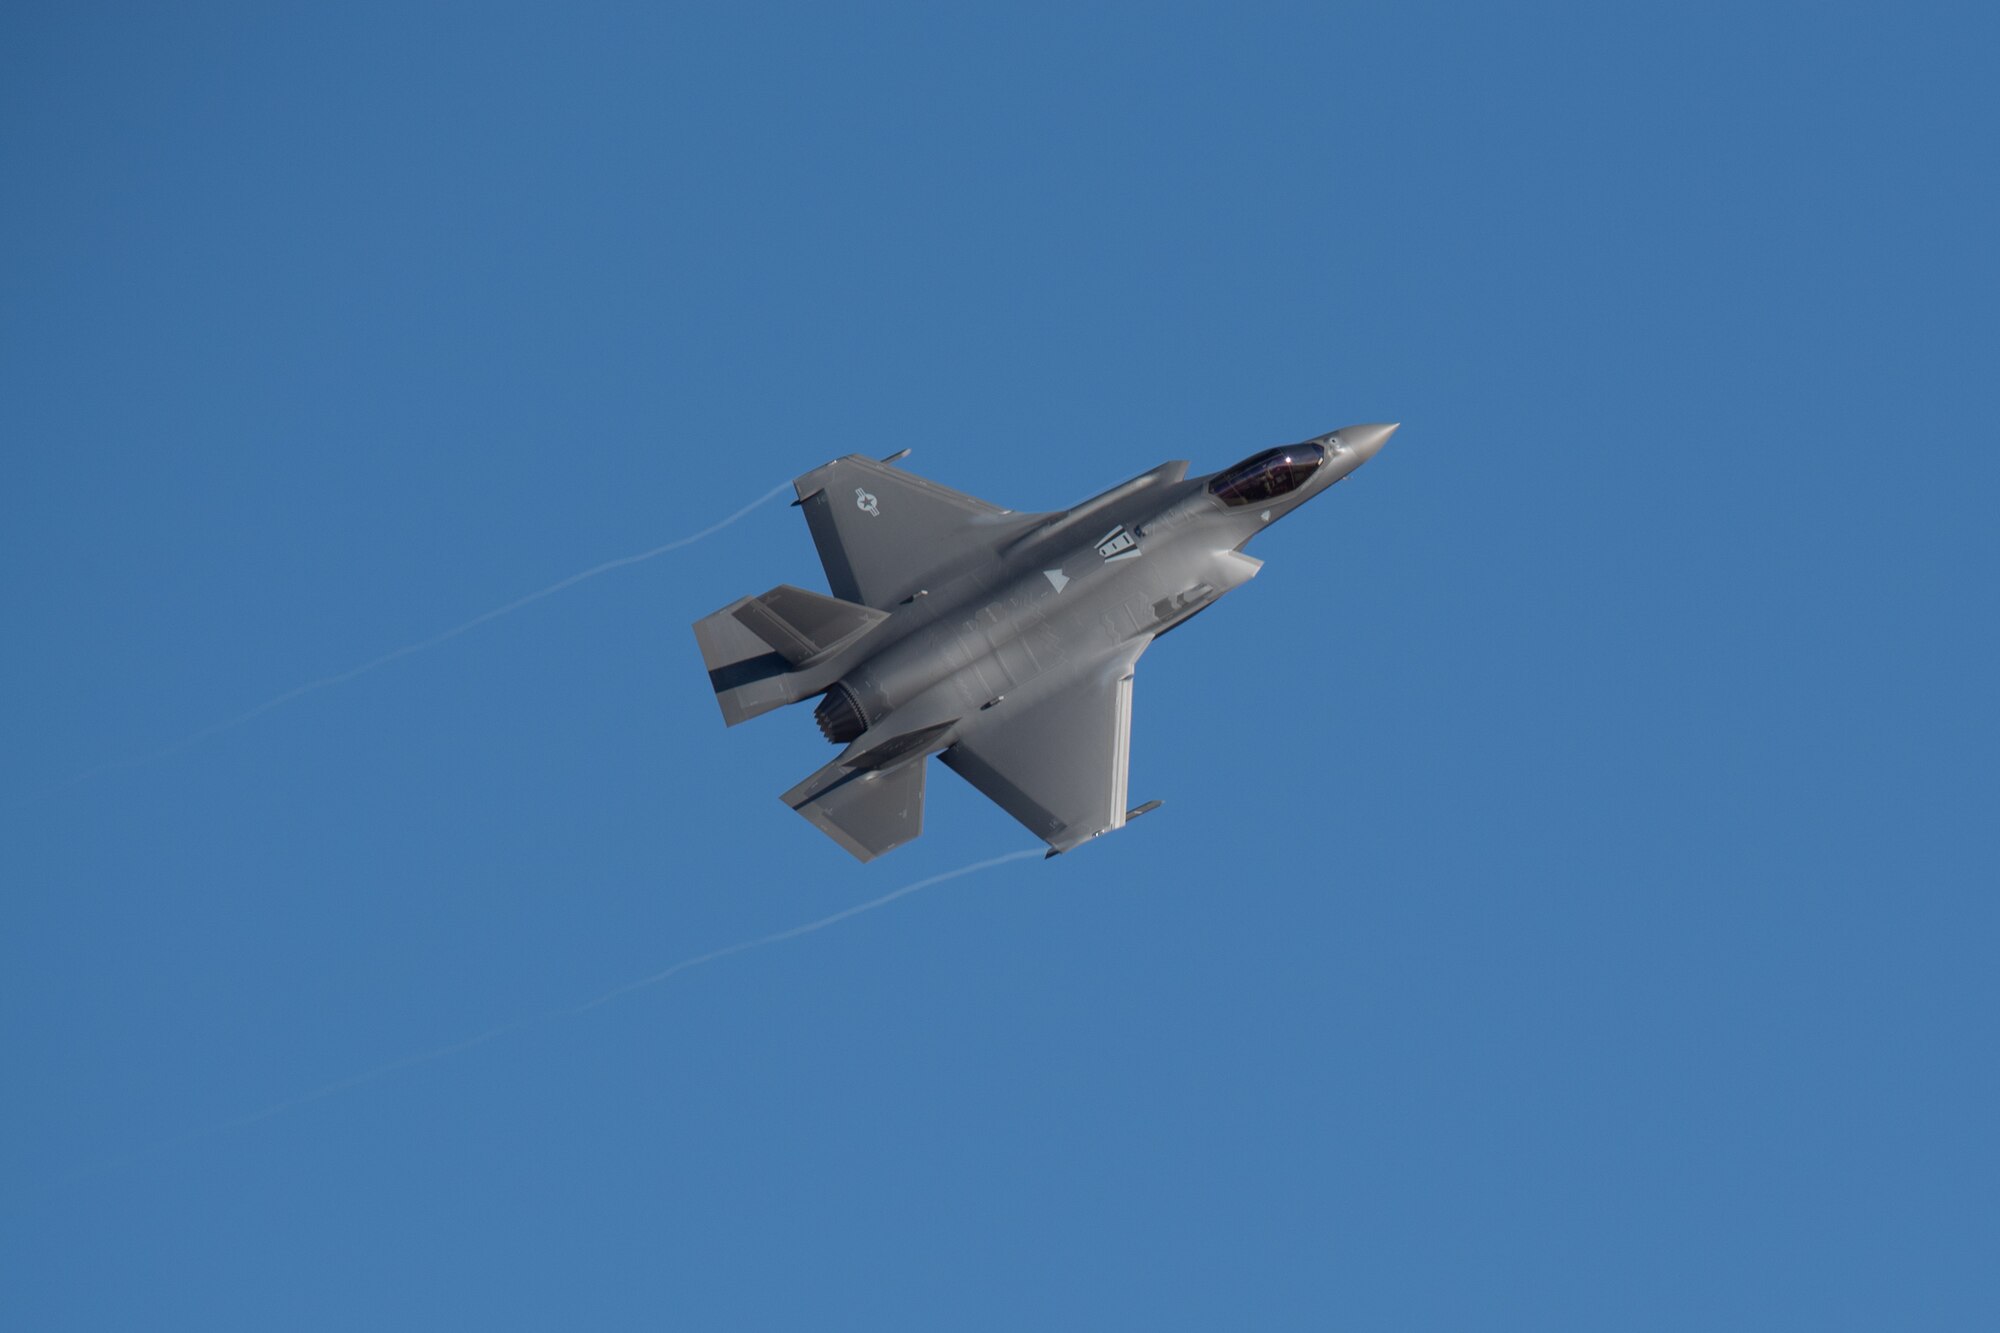 A F-35A Lightning II from the 388th and 419th Fighter Wing fly by as part of a combat power exercise at Hill Air Force Base, Utah. The exercise aims to confirm their ability to quickly employ a large force of jets against air and ground targets, and demonstrate the readiness and lethality of the F-35 Lightning II. As the first combat-ready F-35 units in the Air Force, the 388th and 419th FWs are ready to deploy anywhere in the world at a moment’s notice. (United States Air Force photo/Cynthia Griggs)